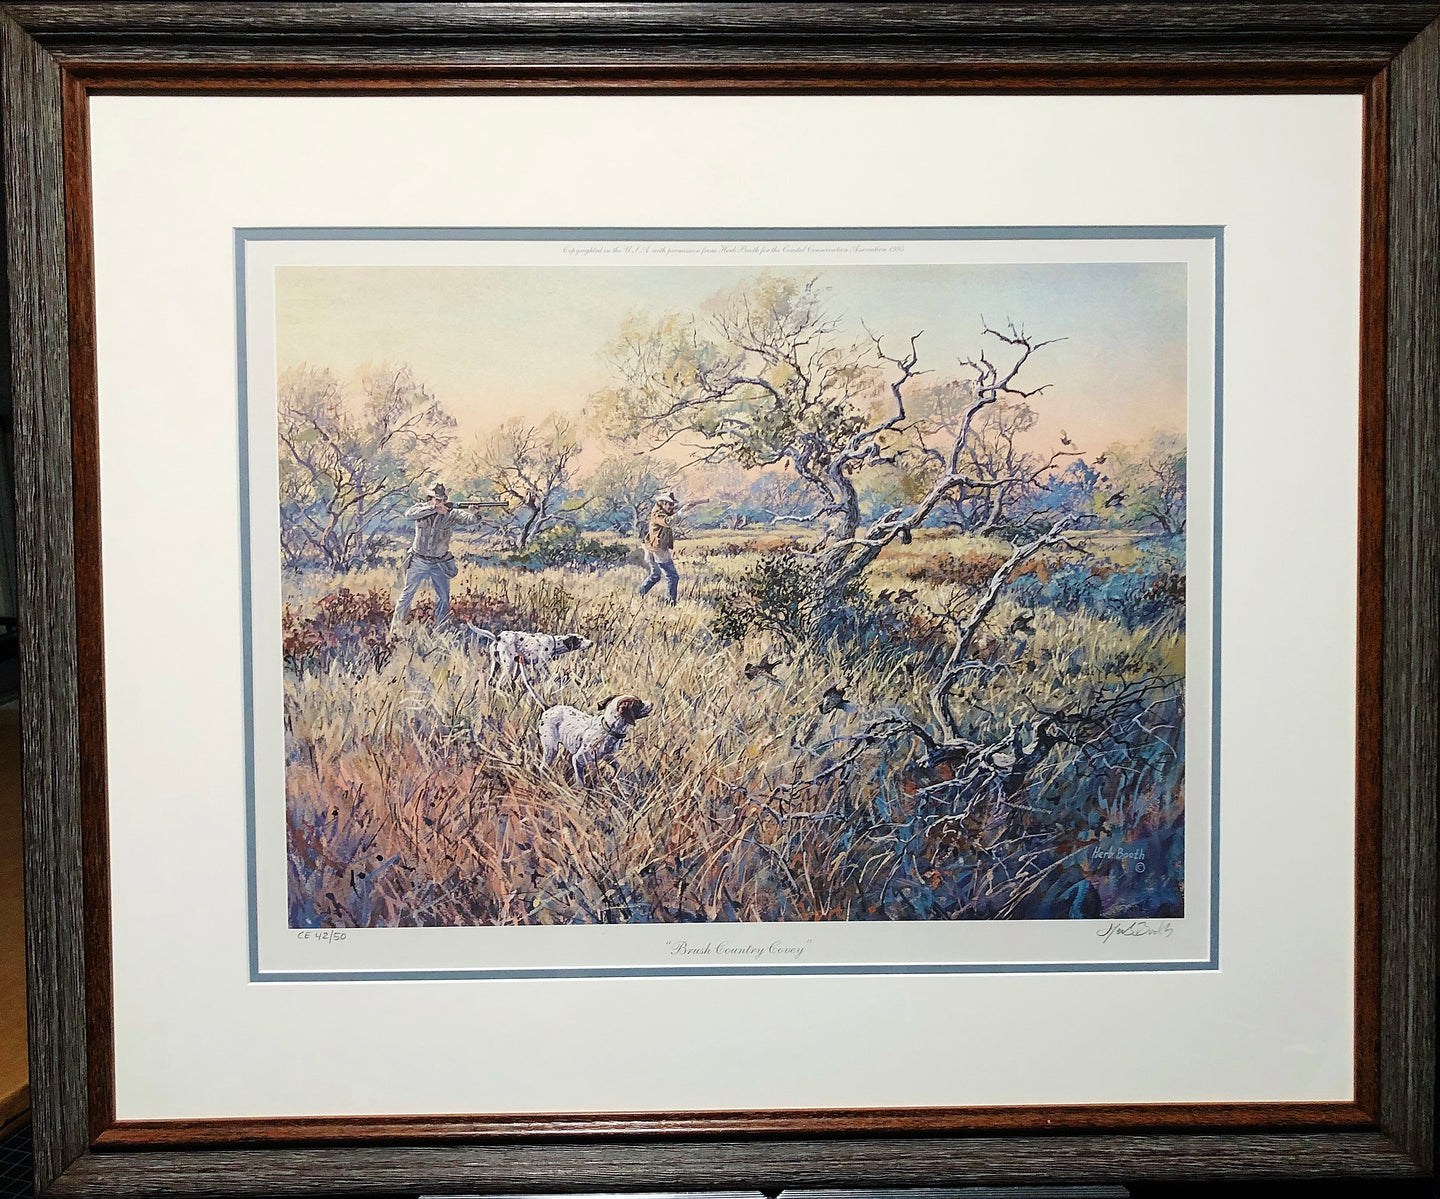 Herb Booth - Brush Country Covey - Lithograph - Brand New Custom Sporting Frame